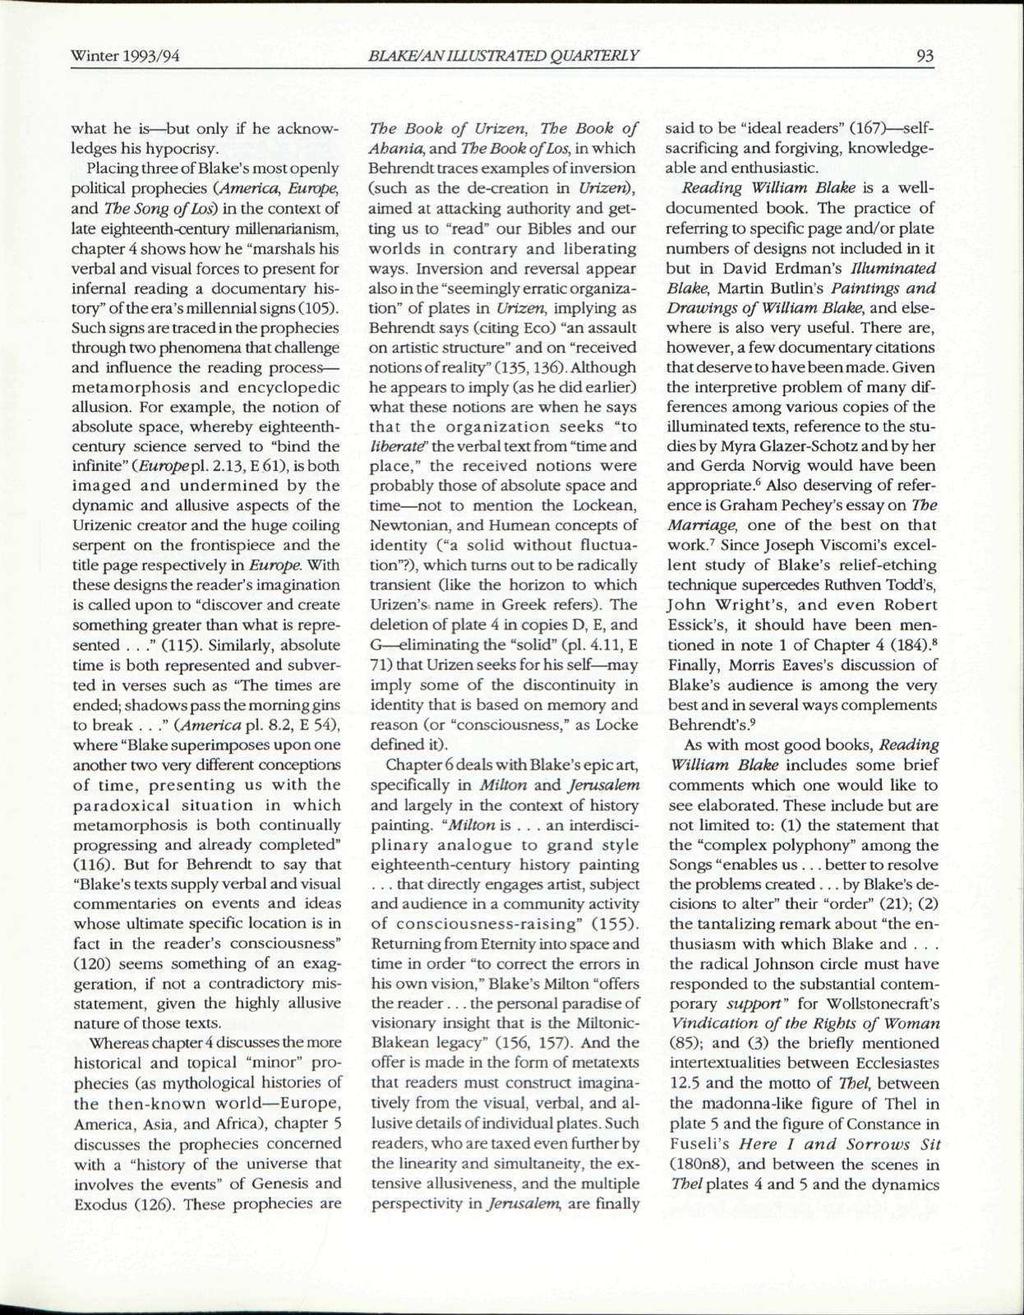 Winter 1993/94 BLAKE/AN ILLUSTRATED QUARTERLY 93 what he is but only if he acknowledges his hypocrisy.